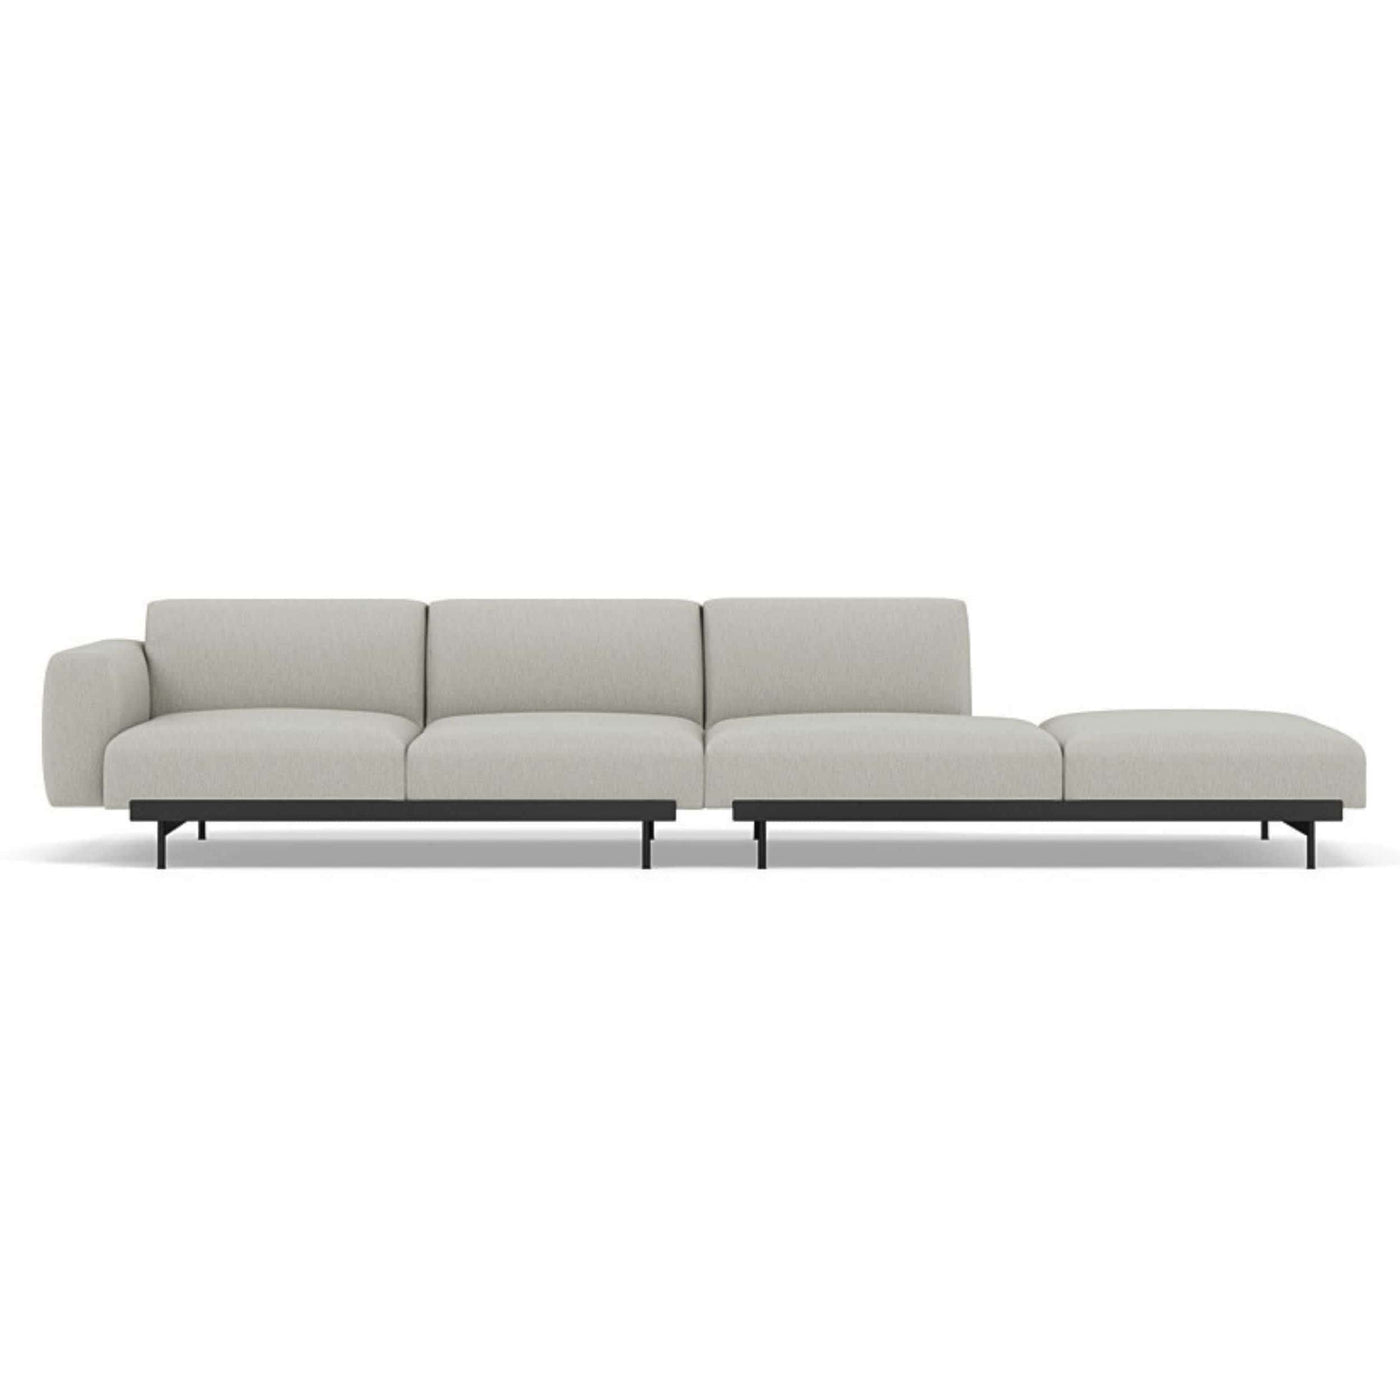 Muuto In Situ Modular 4 Seater Sofa configuration 3 in clay 12. Made to order from someday designs. #colour_clay-12